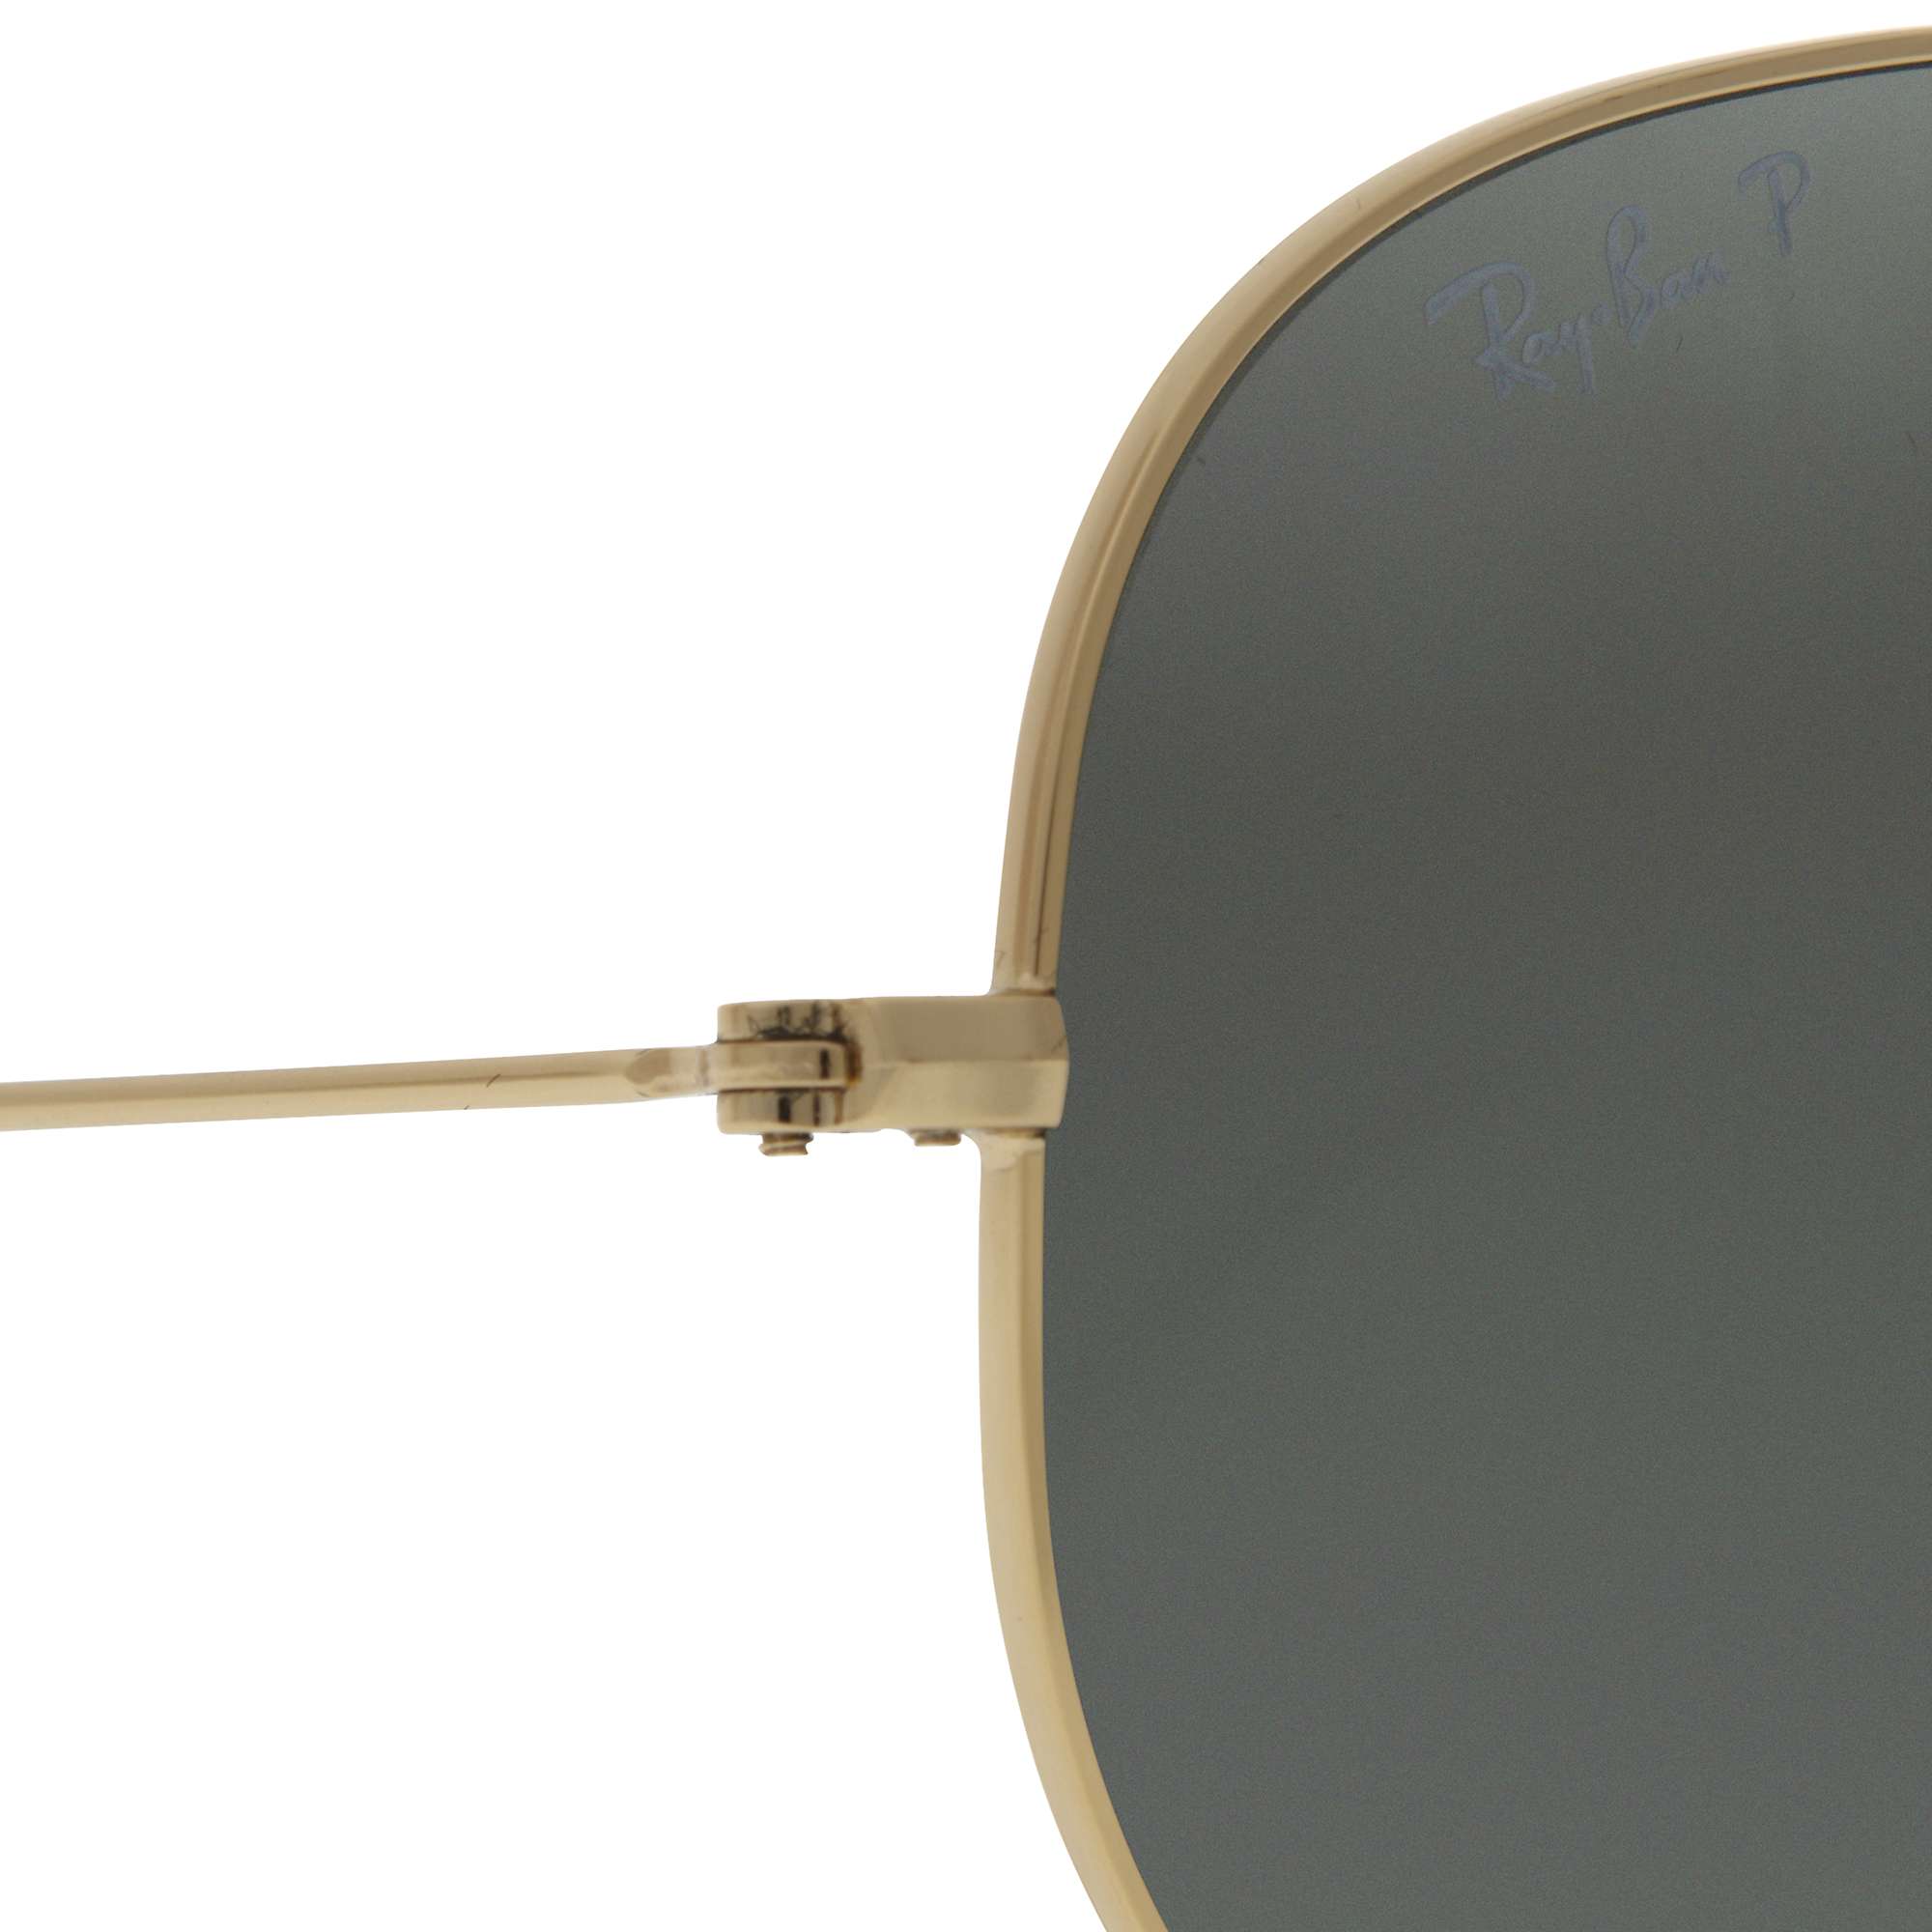 Buy Ray-Ban RB3025 Aviator Sunglasses, Gold/Grey Online at johnlewis.com